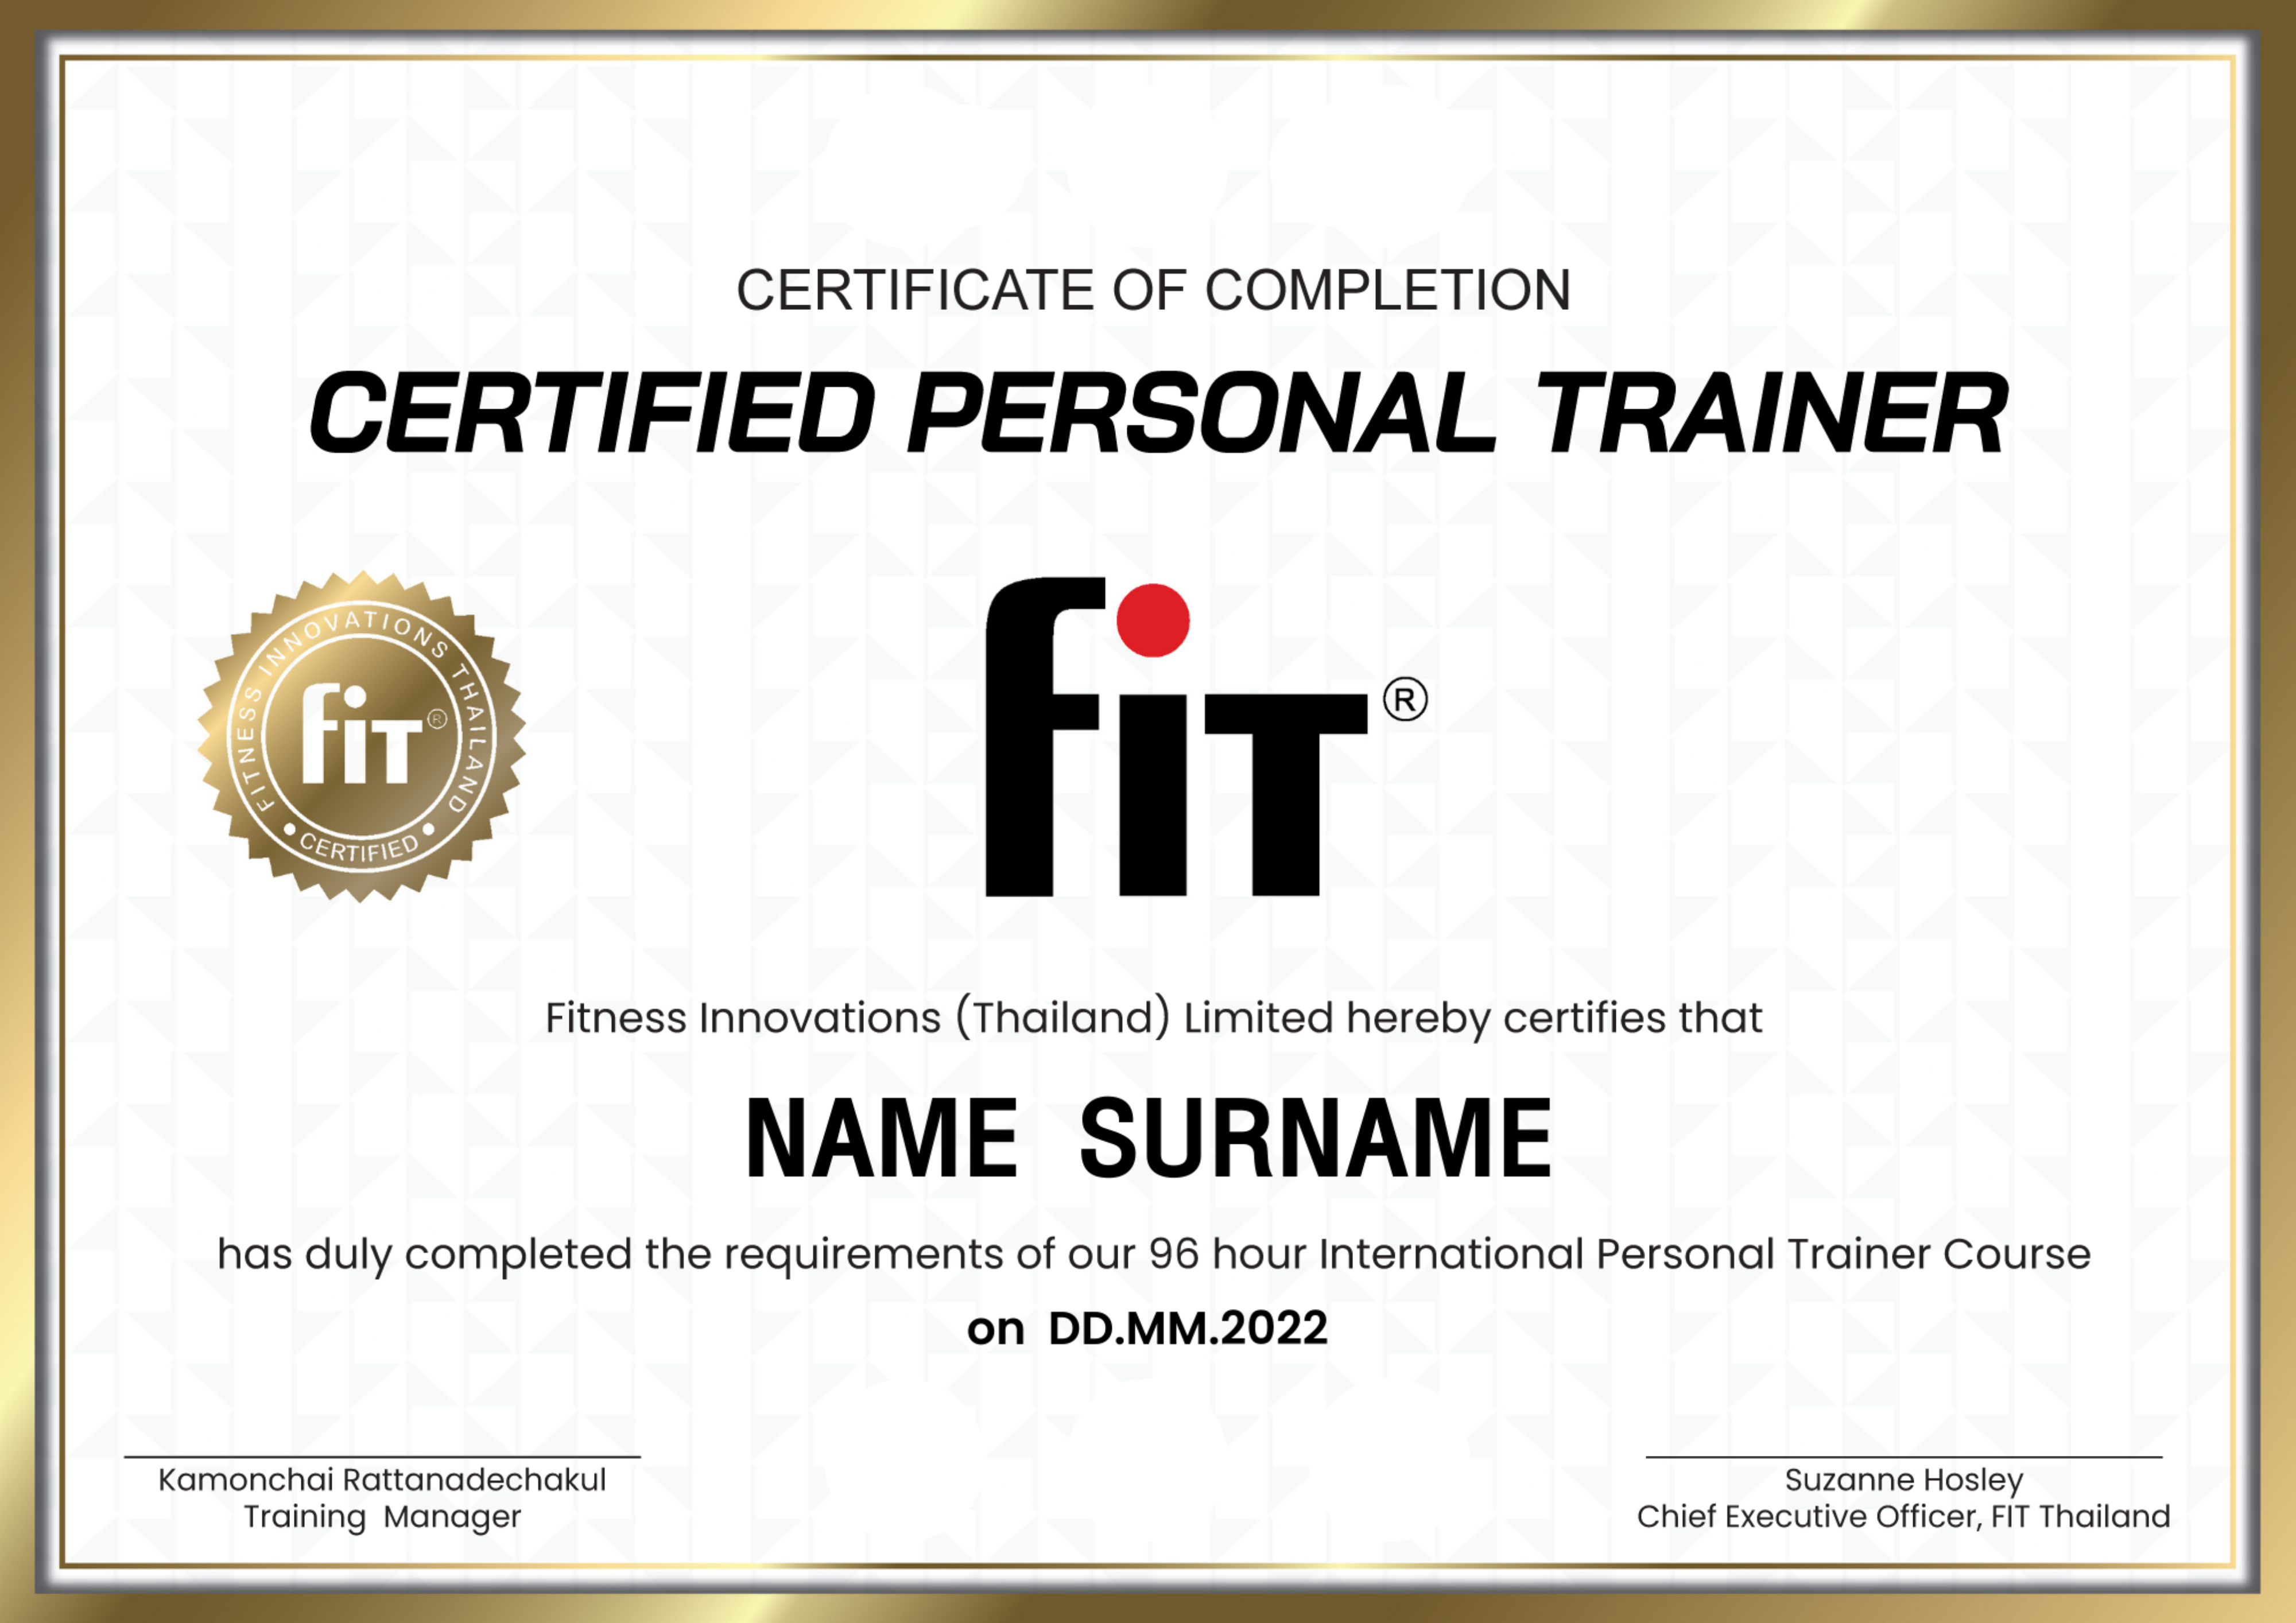 Certified Personal Training